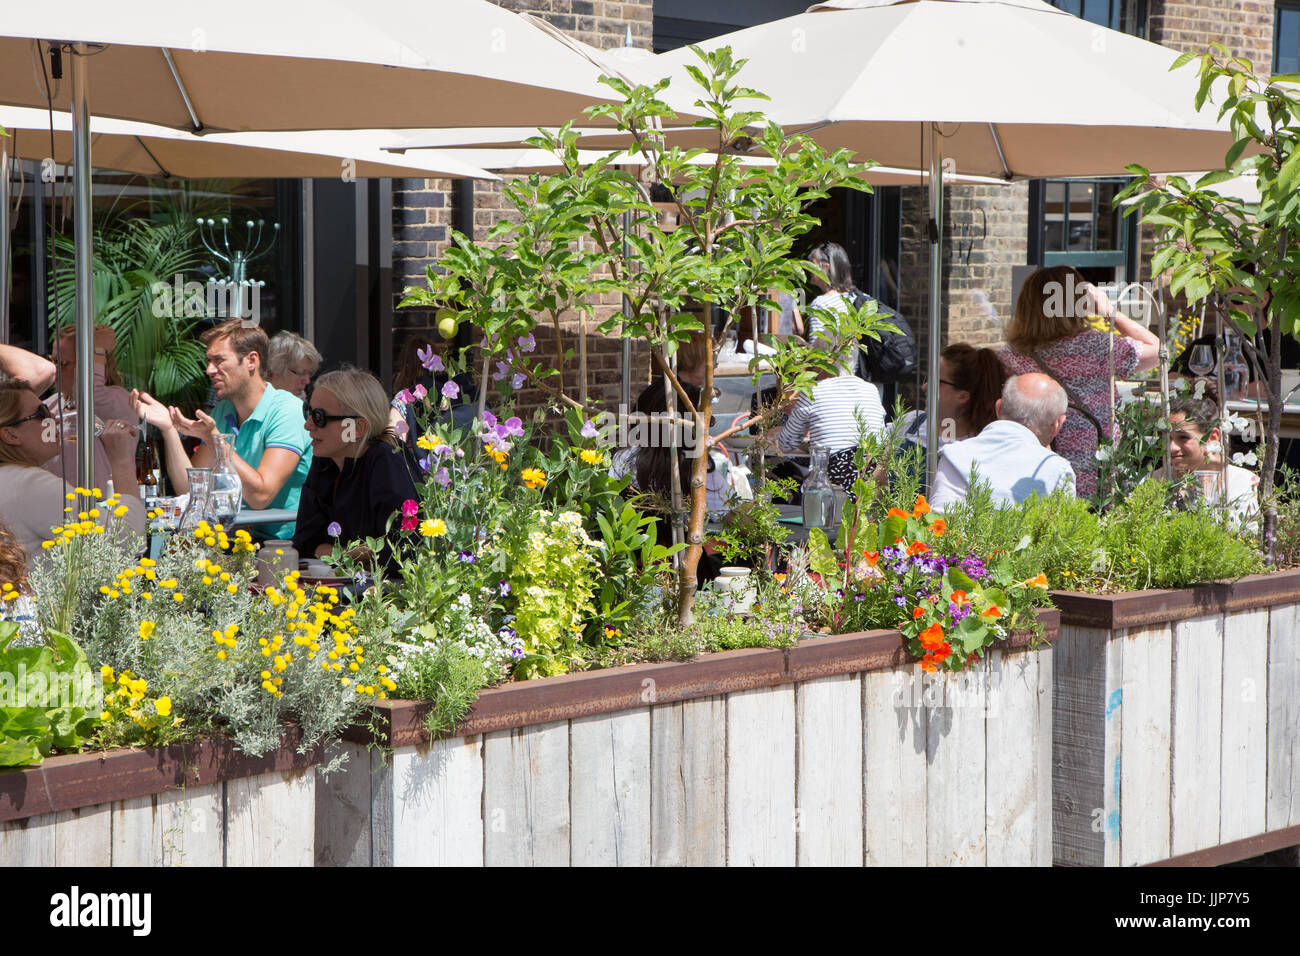 Grain Store, a restaurant in Granary Square King's Cross. Diners are eating al fresco in the garden outside Stock Photo